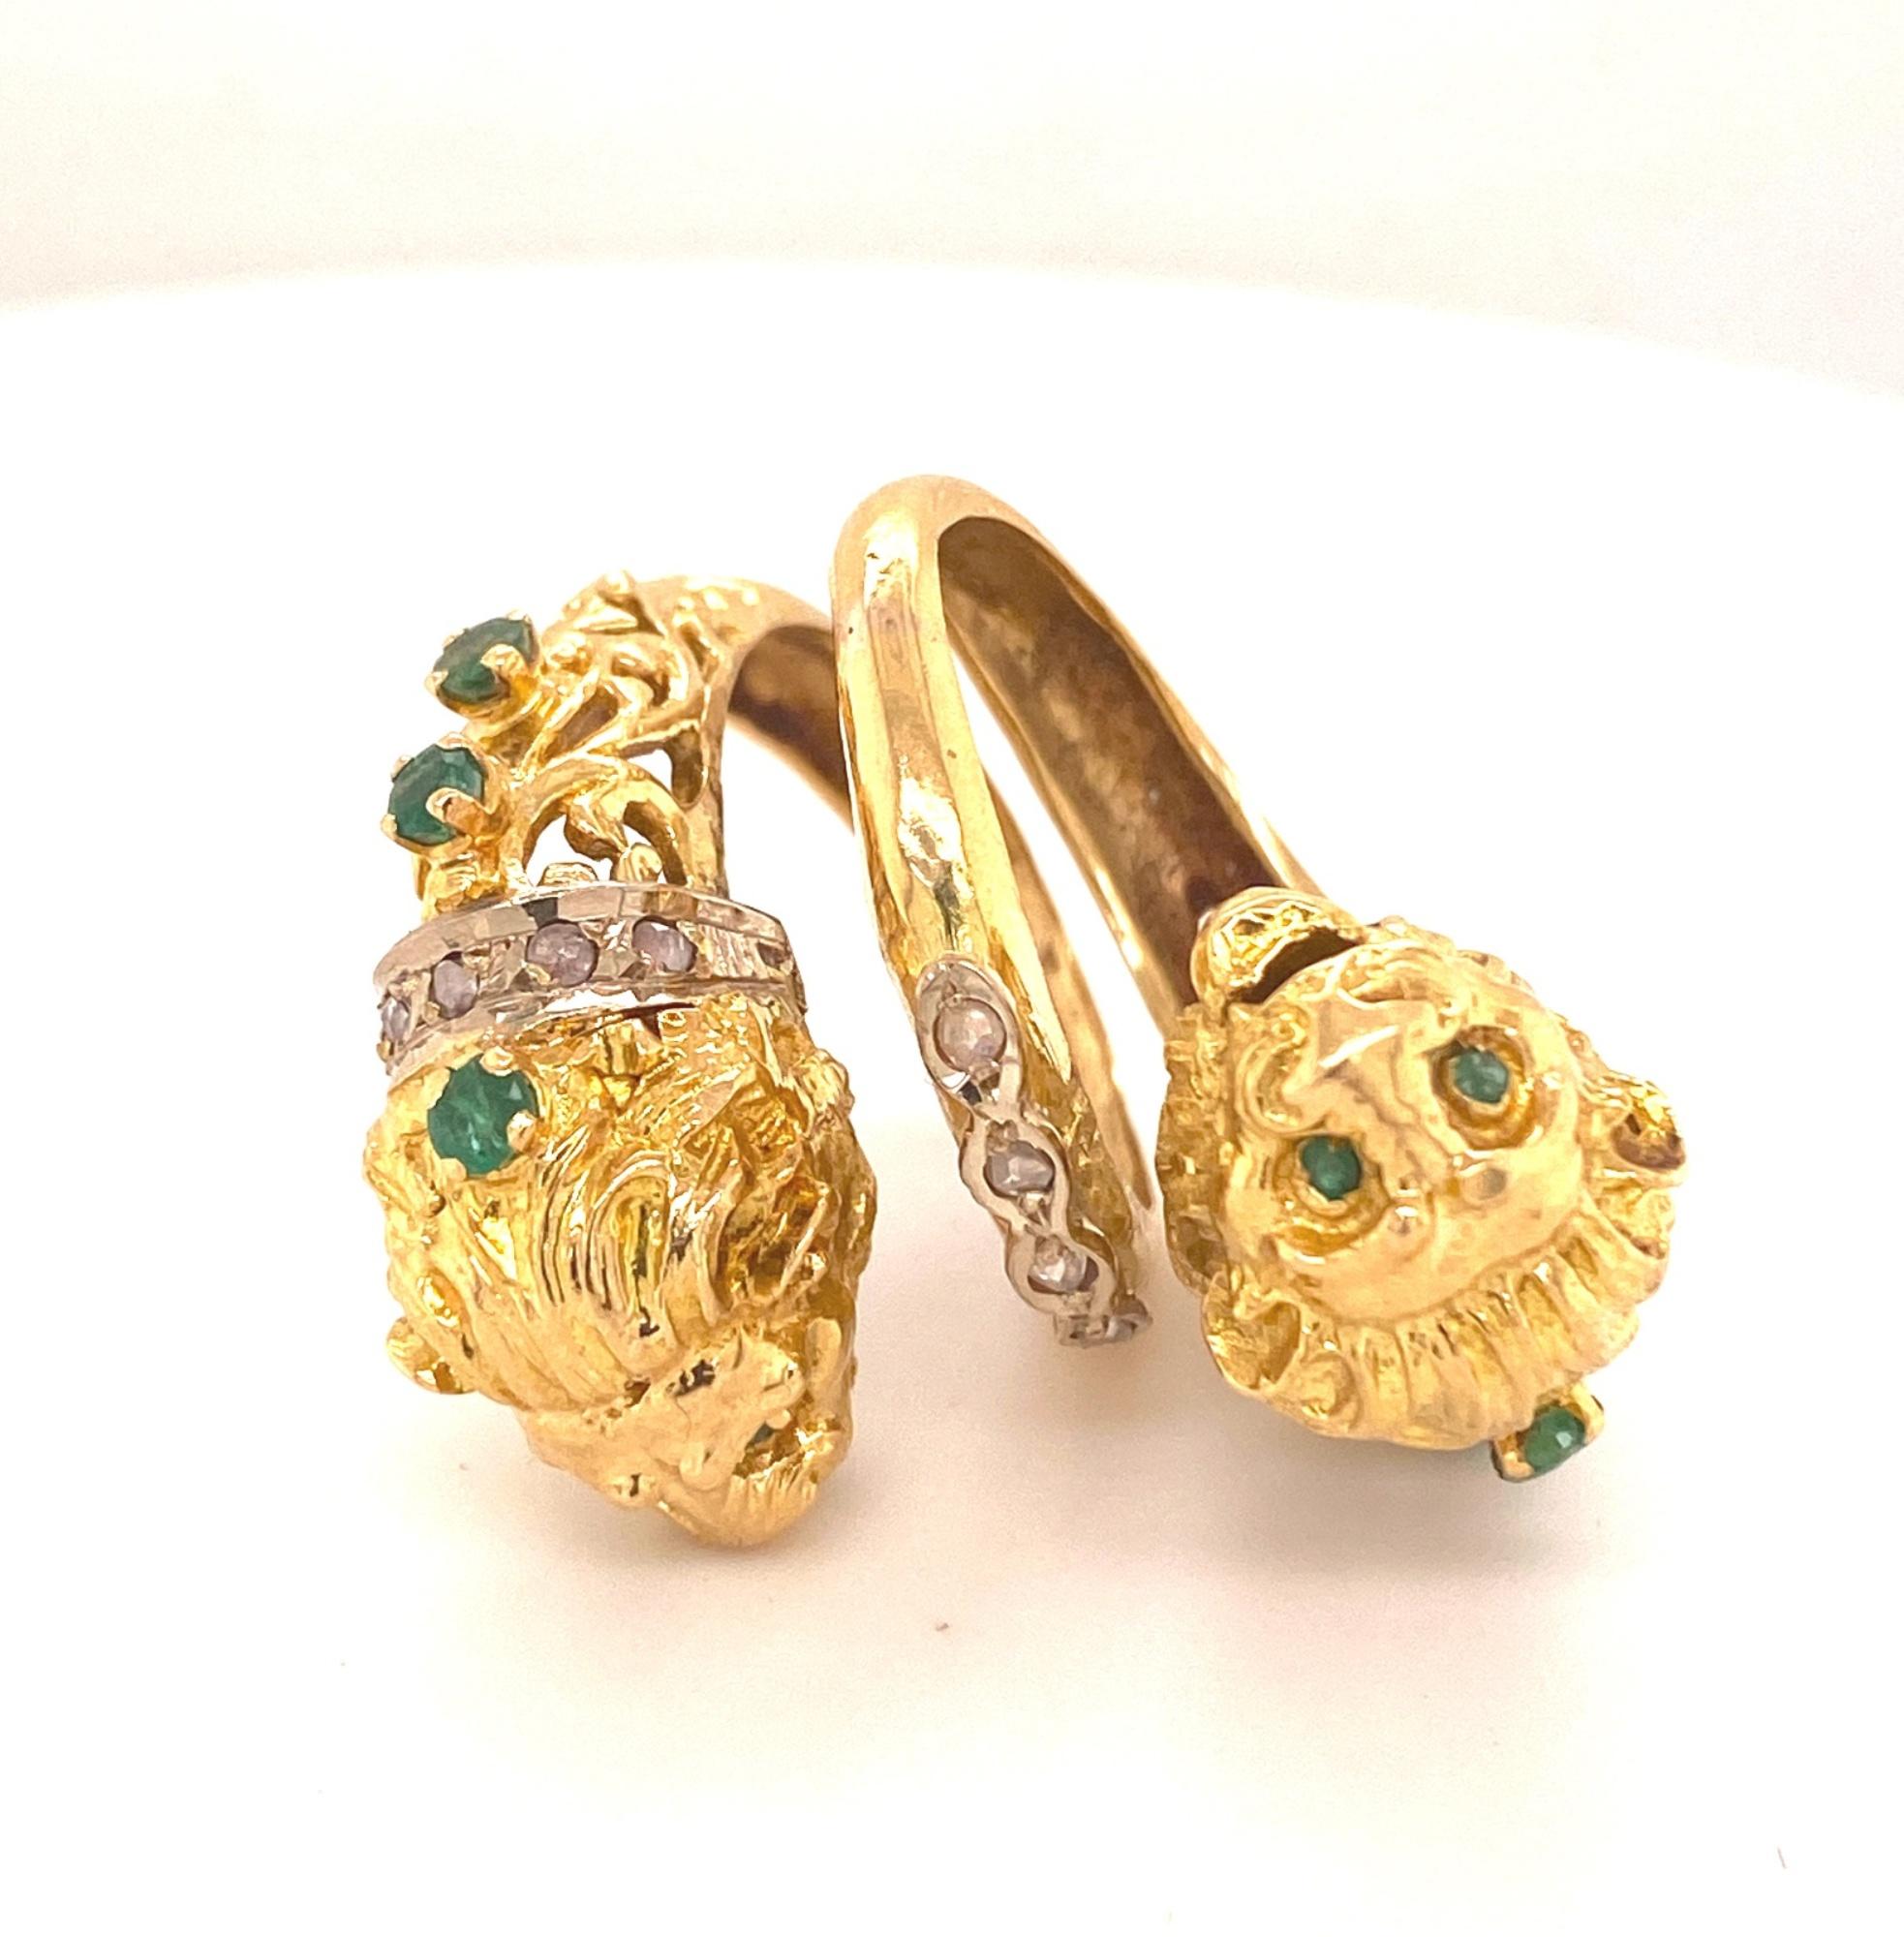 Greek Double Chimera Lion Head Emerald Diamond Filigree 18K Yellow Gold Ring. This is a beautiful Greek double chimera lion head ring with a filigree design emeralds and rose cut diamonds. The sculpture and detail is superb. Total gem weight .70